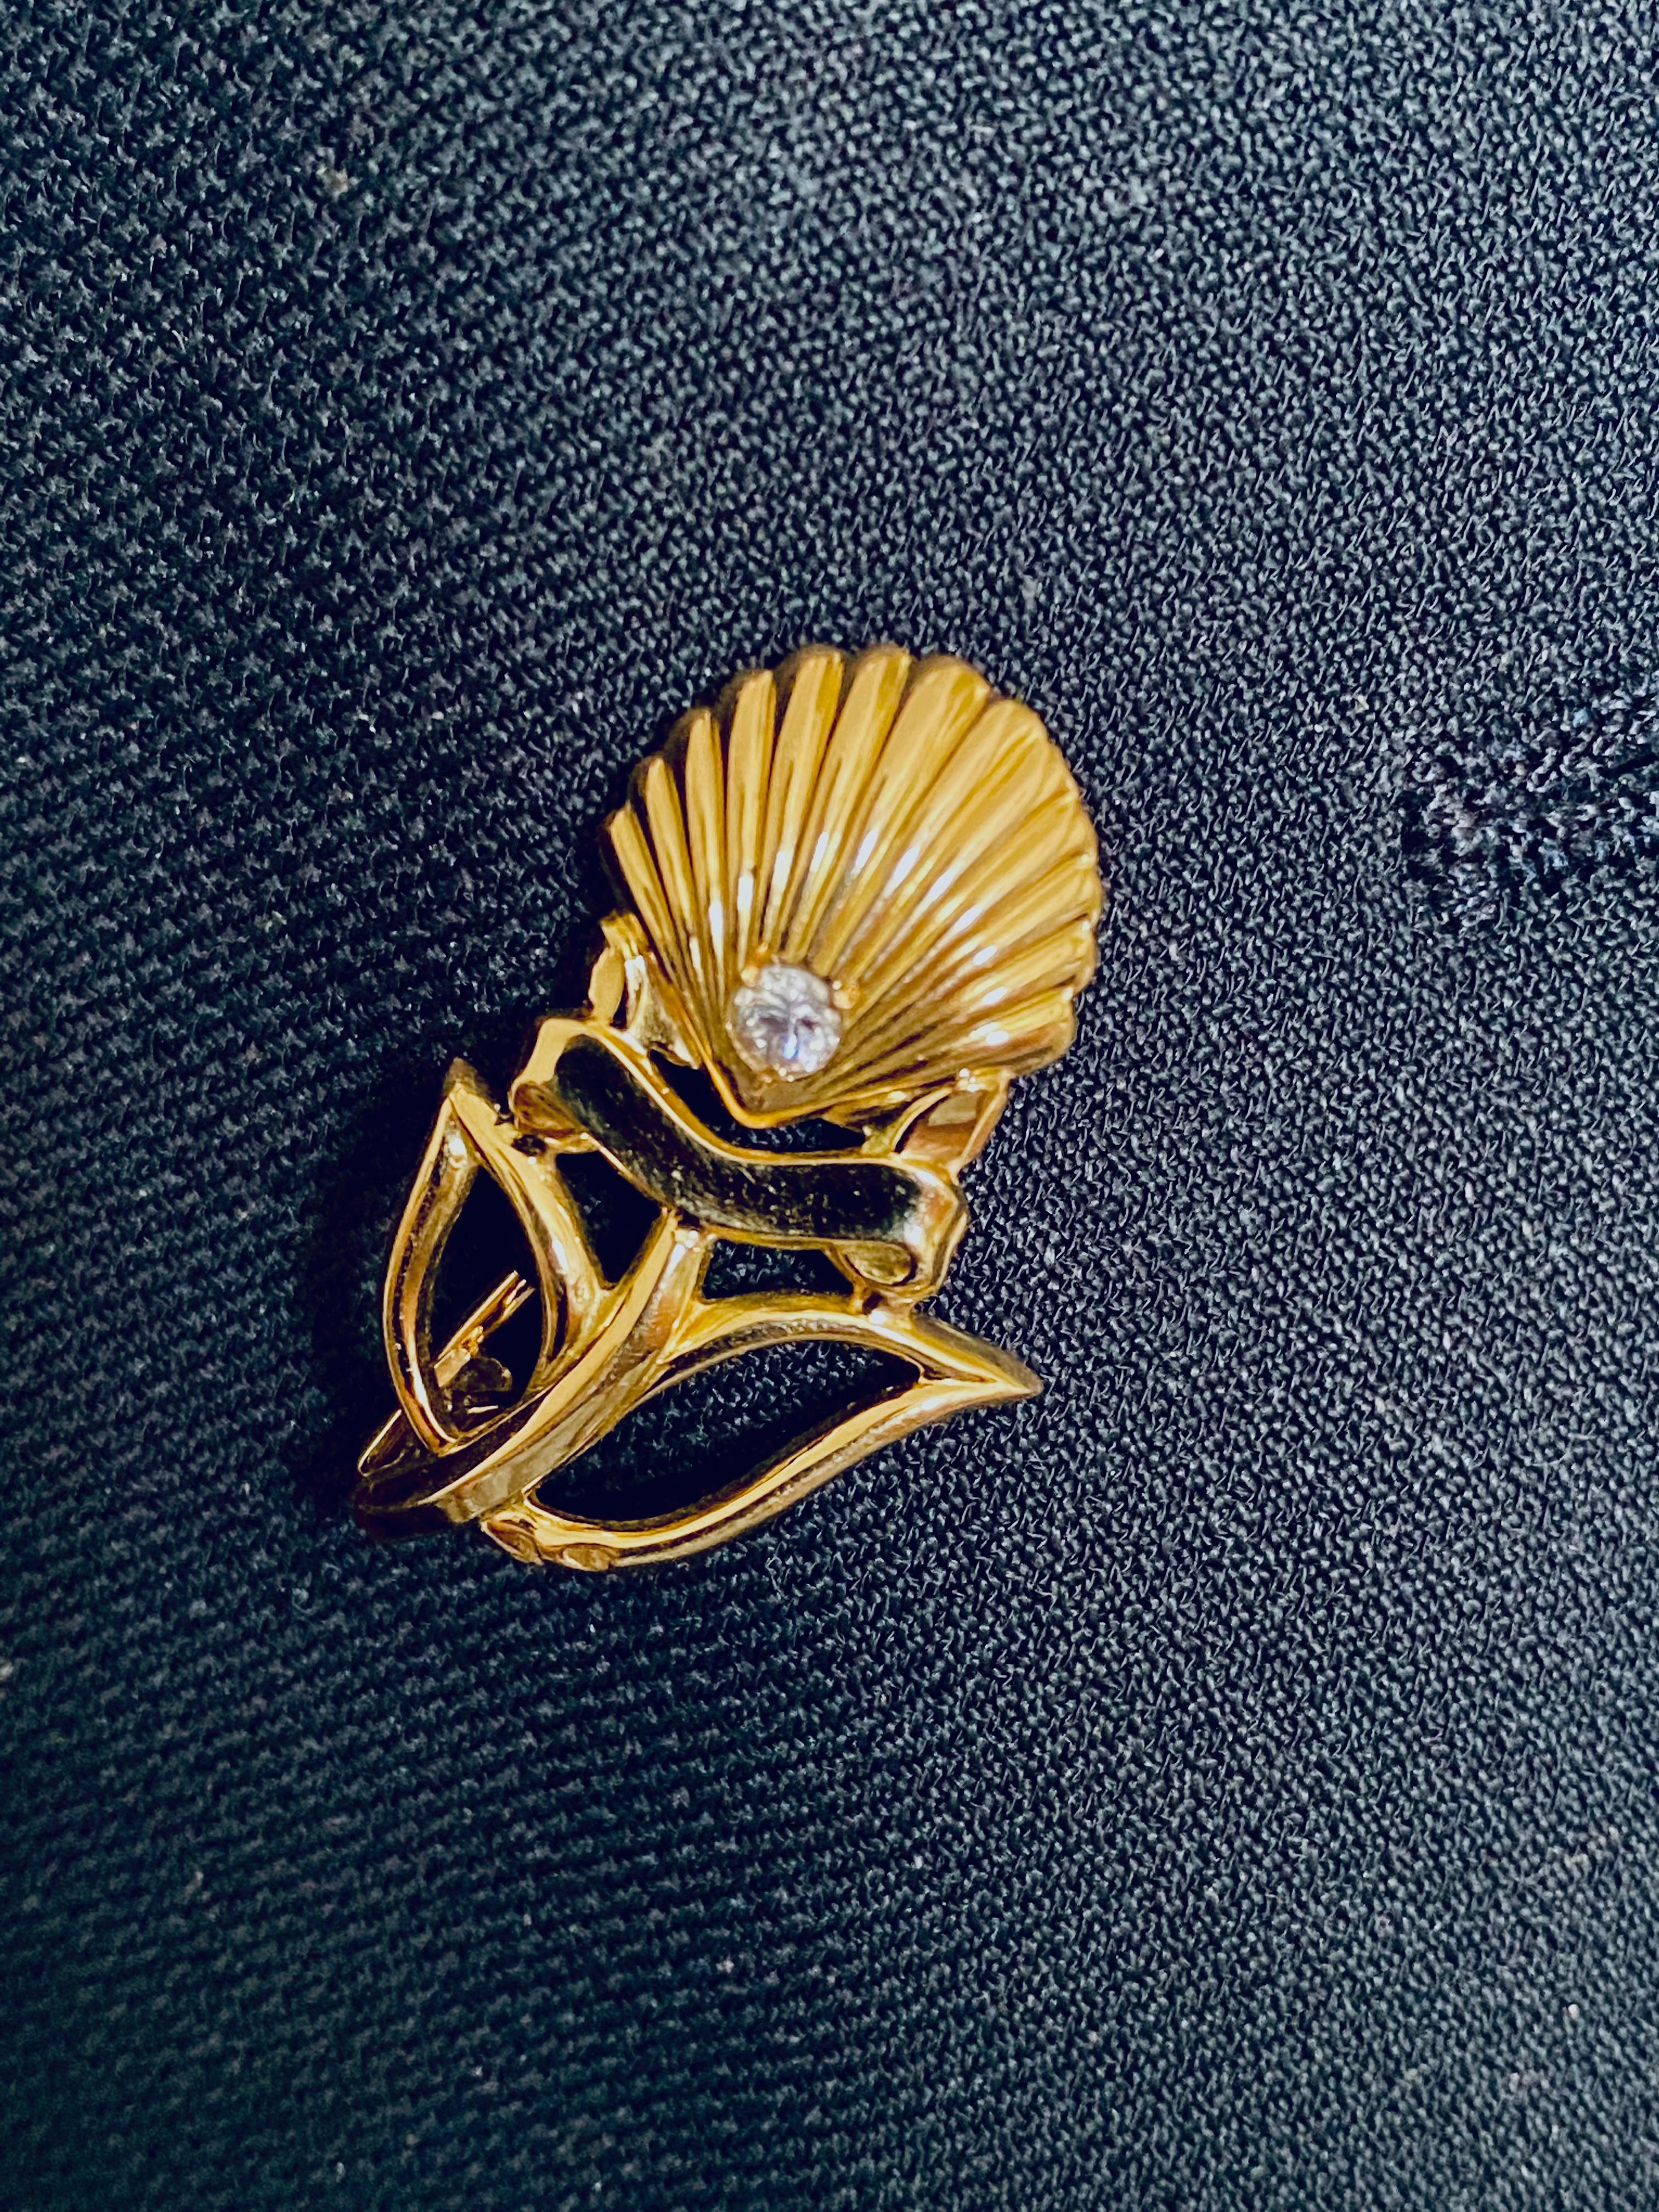 Vintage Cartier Brooch in 18 karat yellow gold, in the shape of a shell, studded with a diamond.
Maker's mark.
The brooch is in its own Cartier box
In excellent condition 
Brooch measuring 1.10 inch by 0.65 inch
According to the magazine Watch Time,